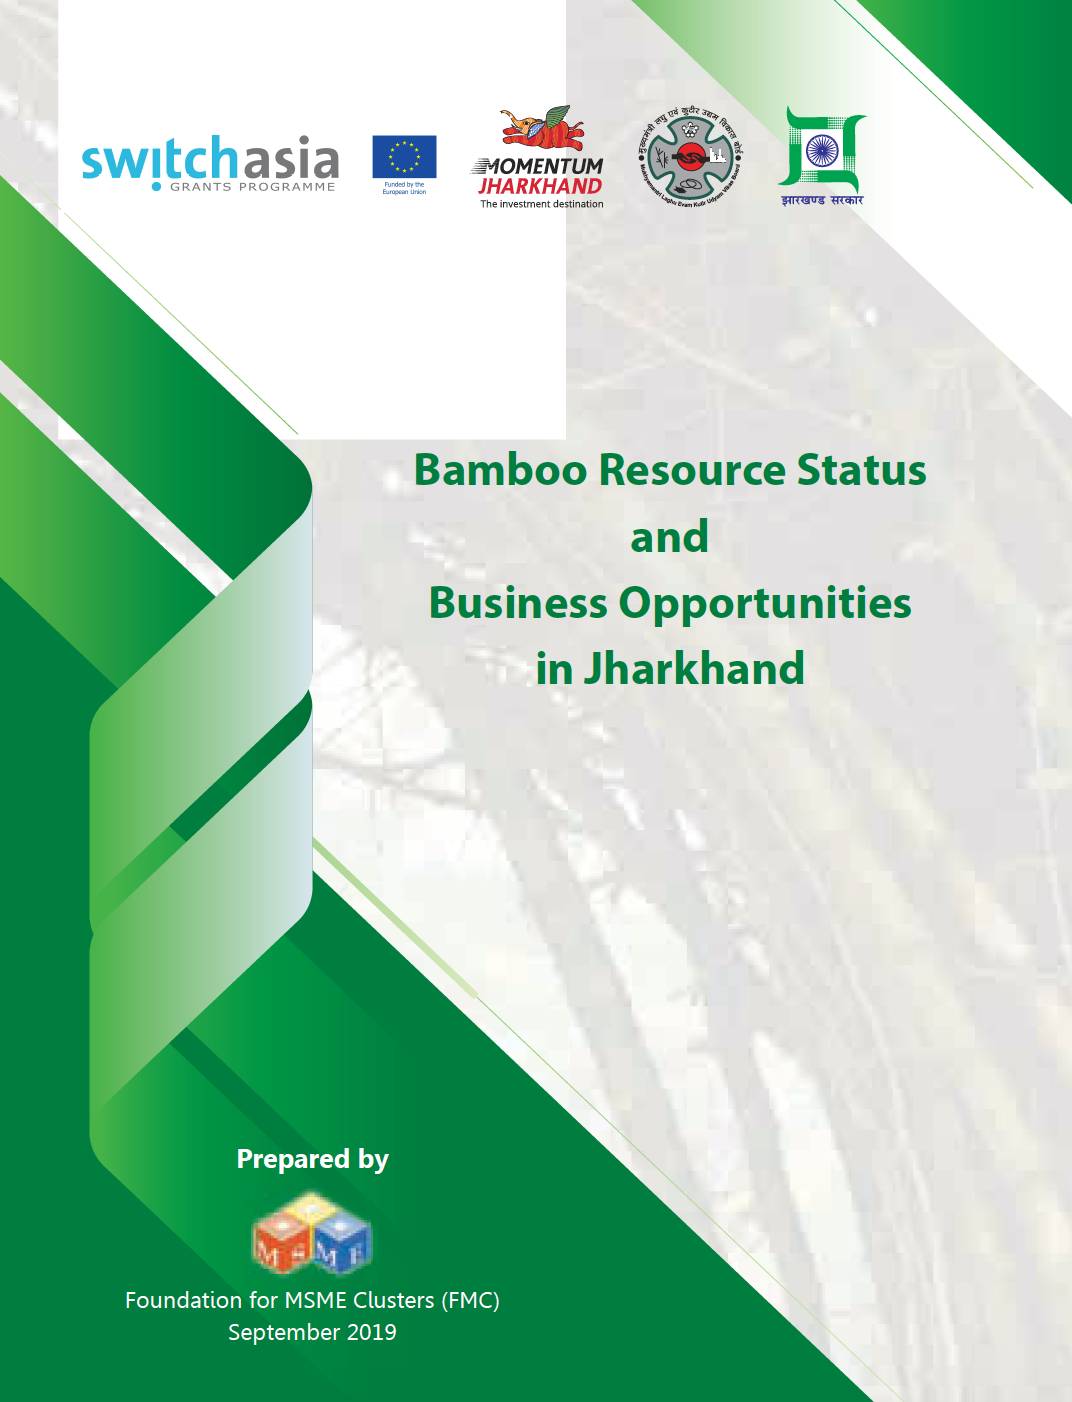 Bamboo Resource Status and Business Opportunities in Jharkhand